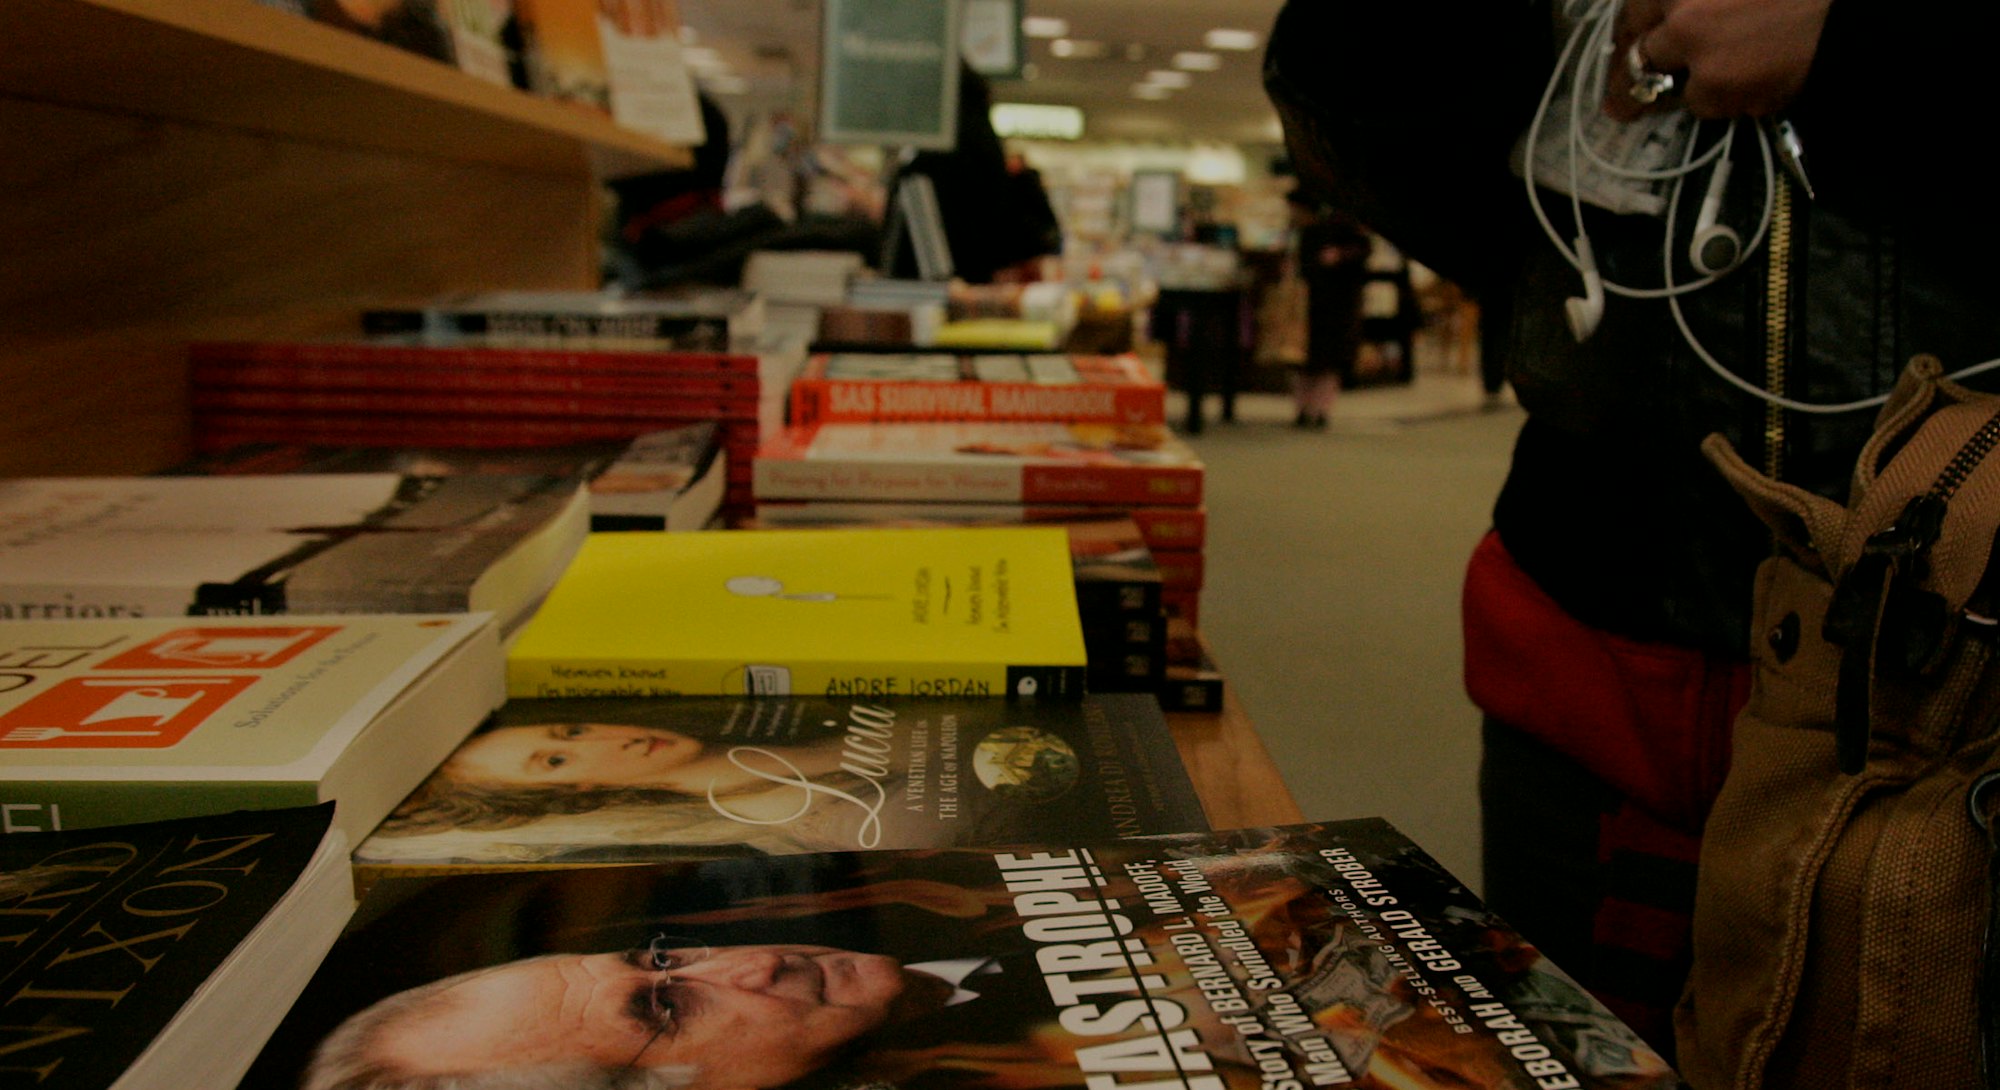 (031309 Boston, MA) A shopper looks over a book at a display table featuring copies of 'Catastrophe'...